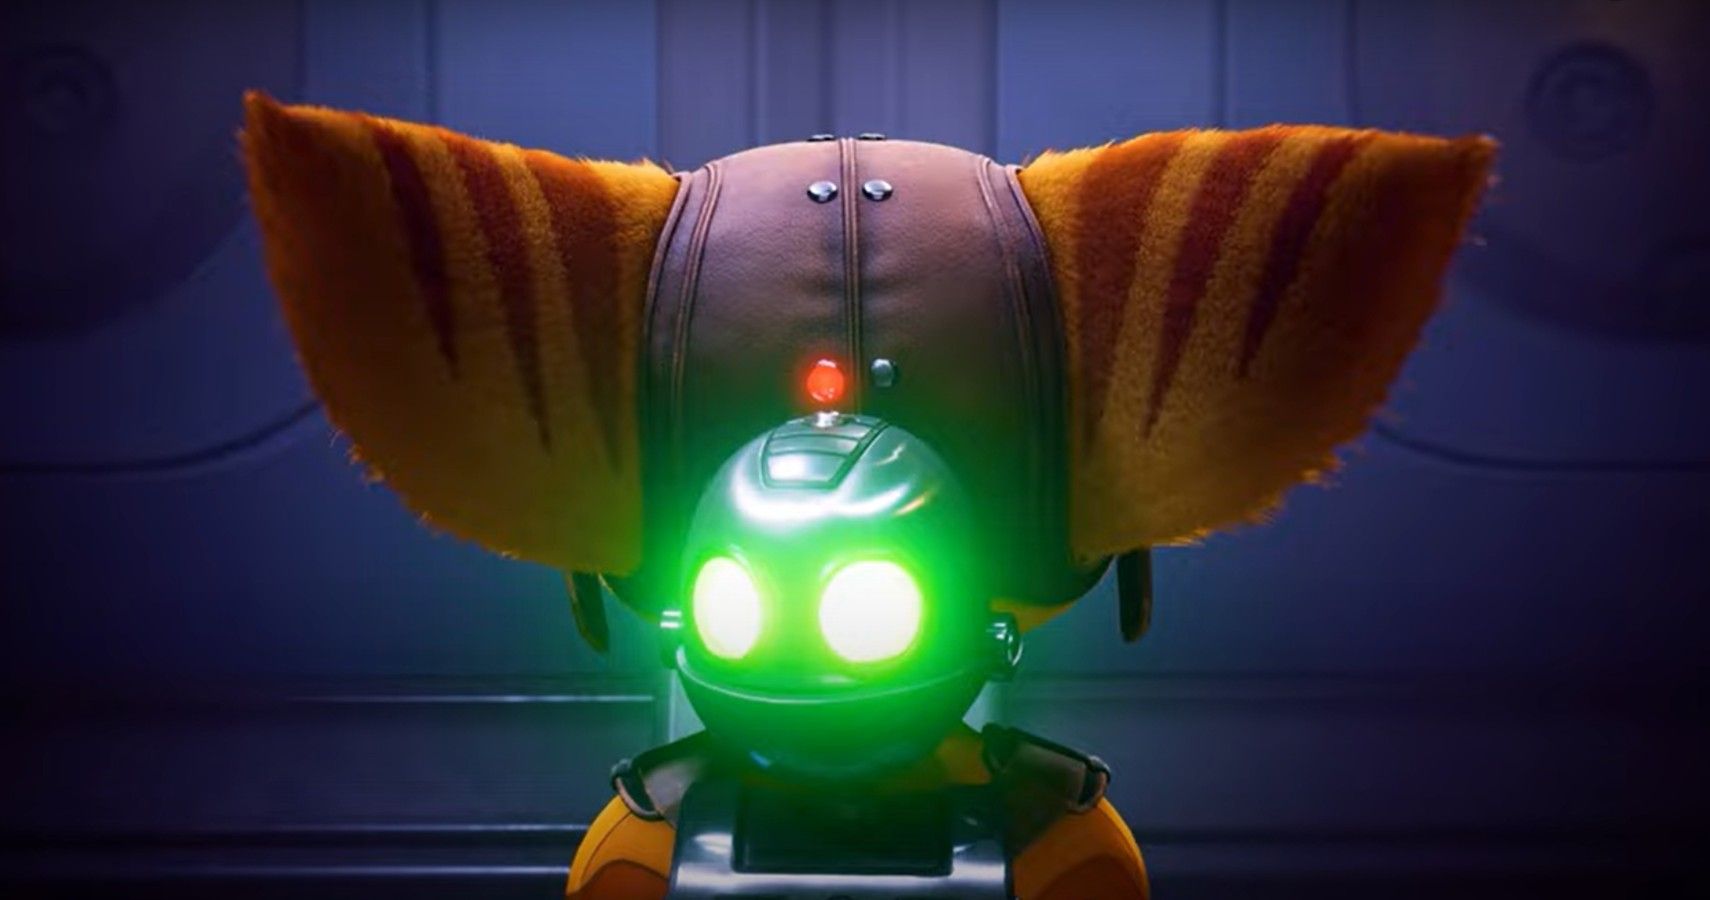 Console Warriors Are Mad At Insomniac For Calling Ratchet & Clank’s Robots “Bots”